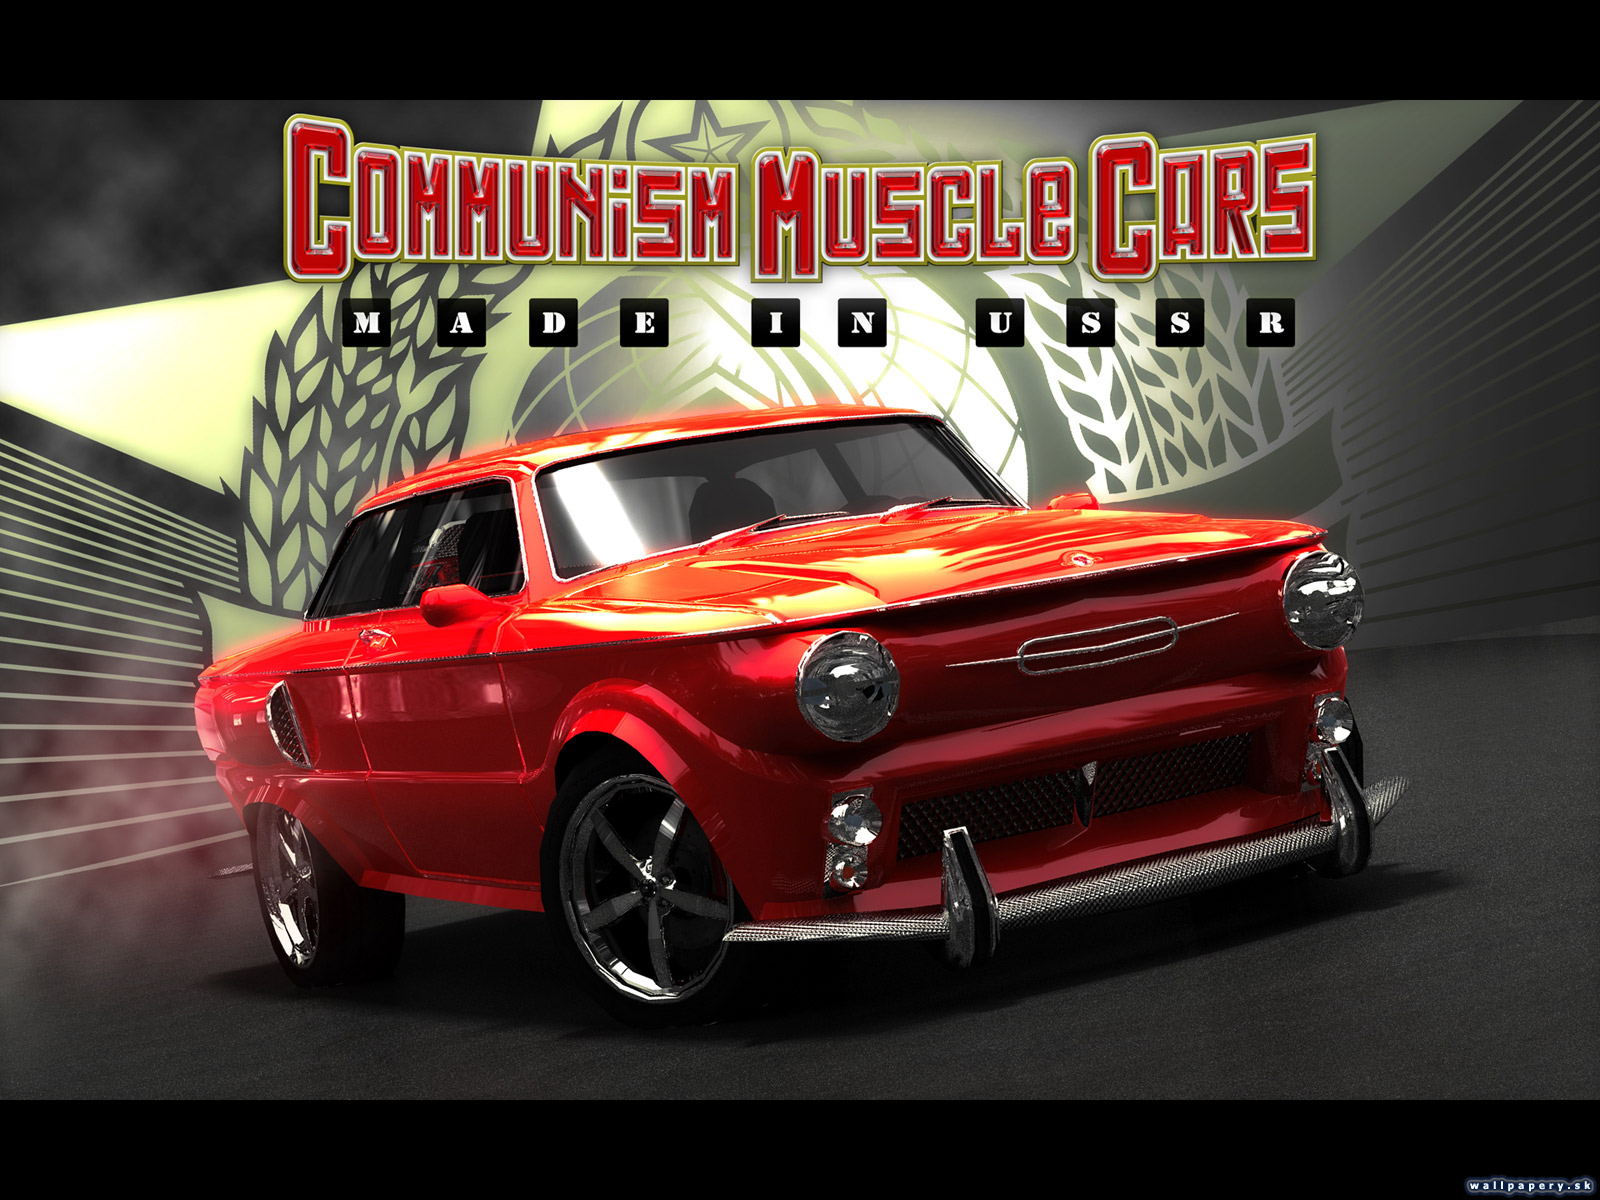 Communism Muscle Cars: Made in USSR - wallpaper 2